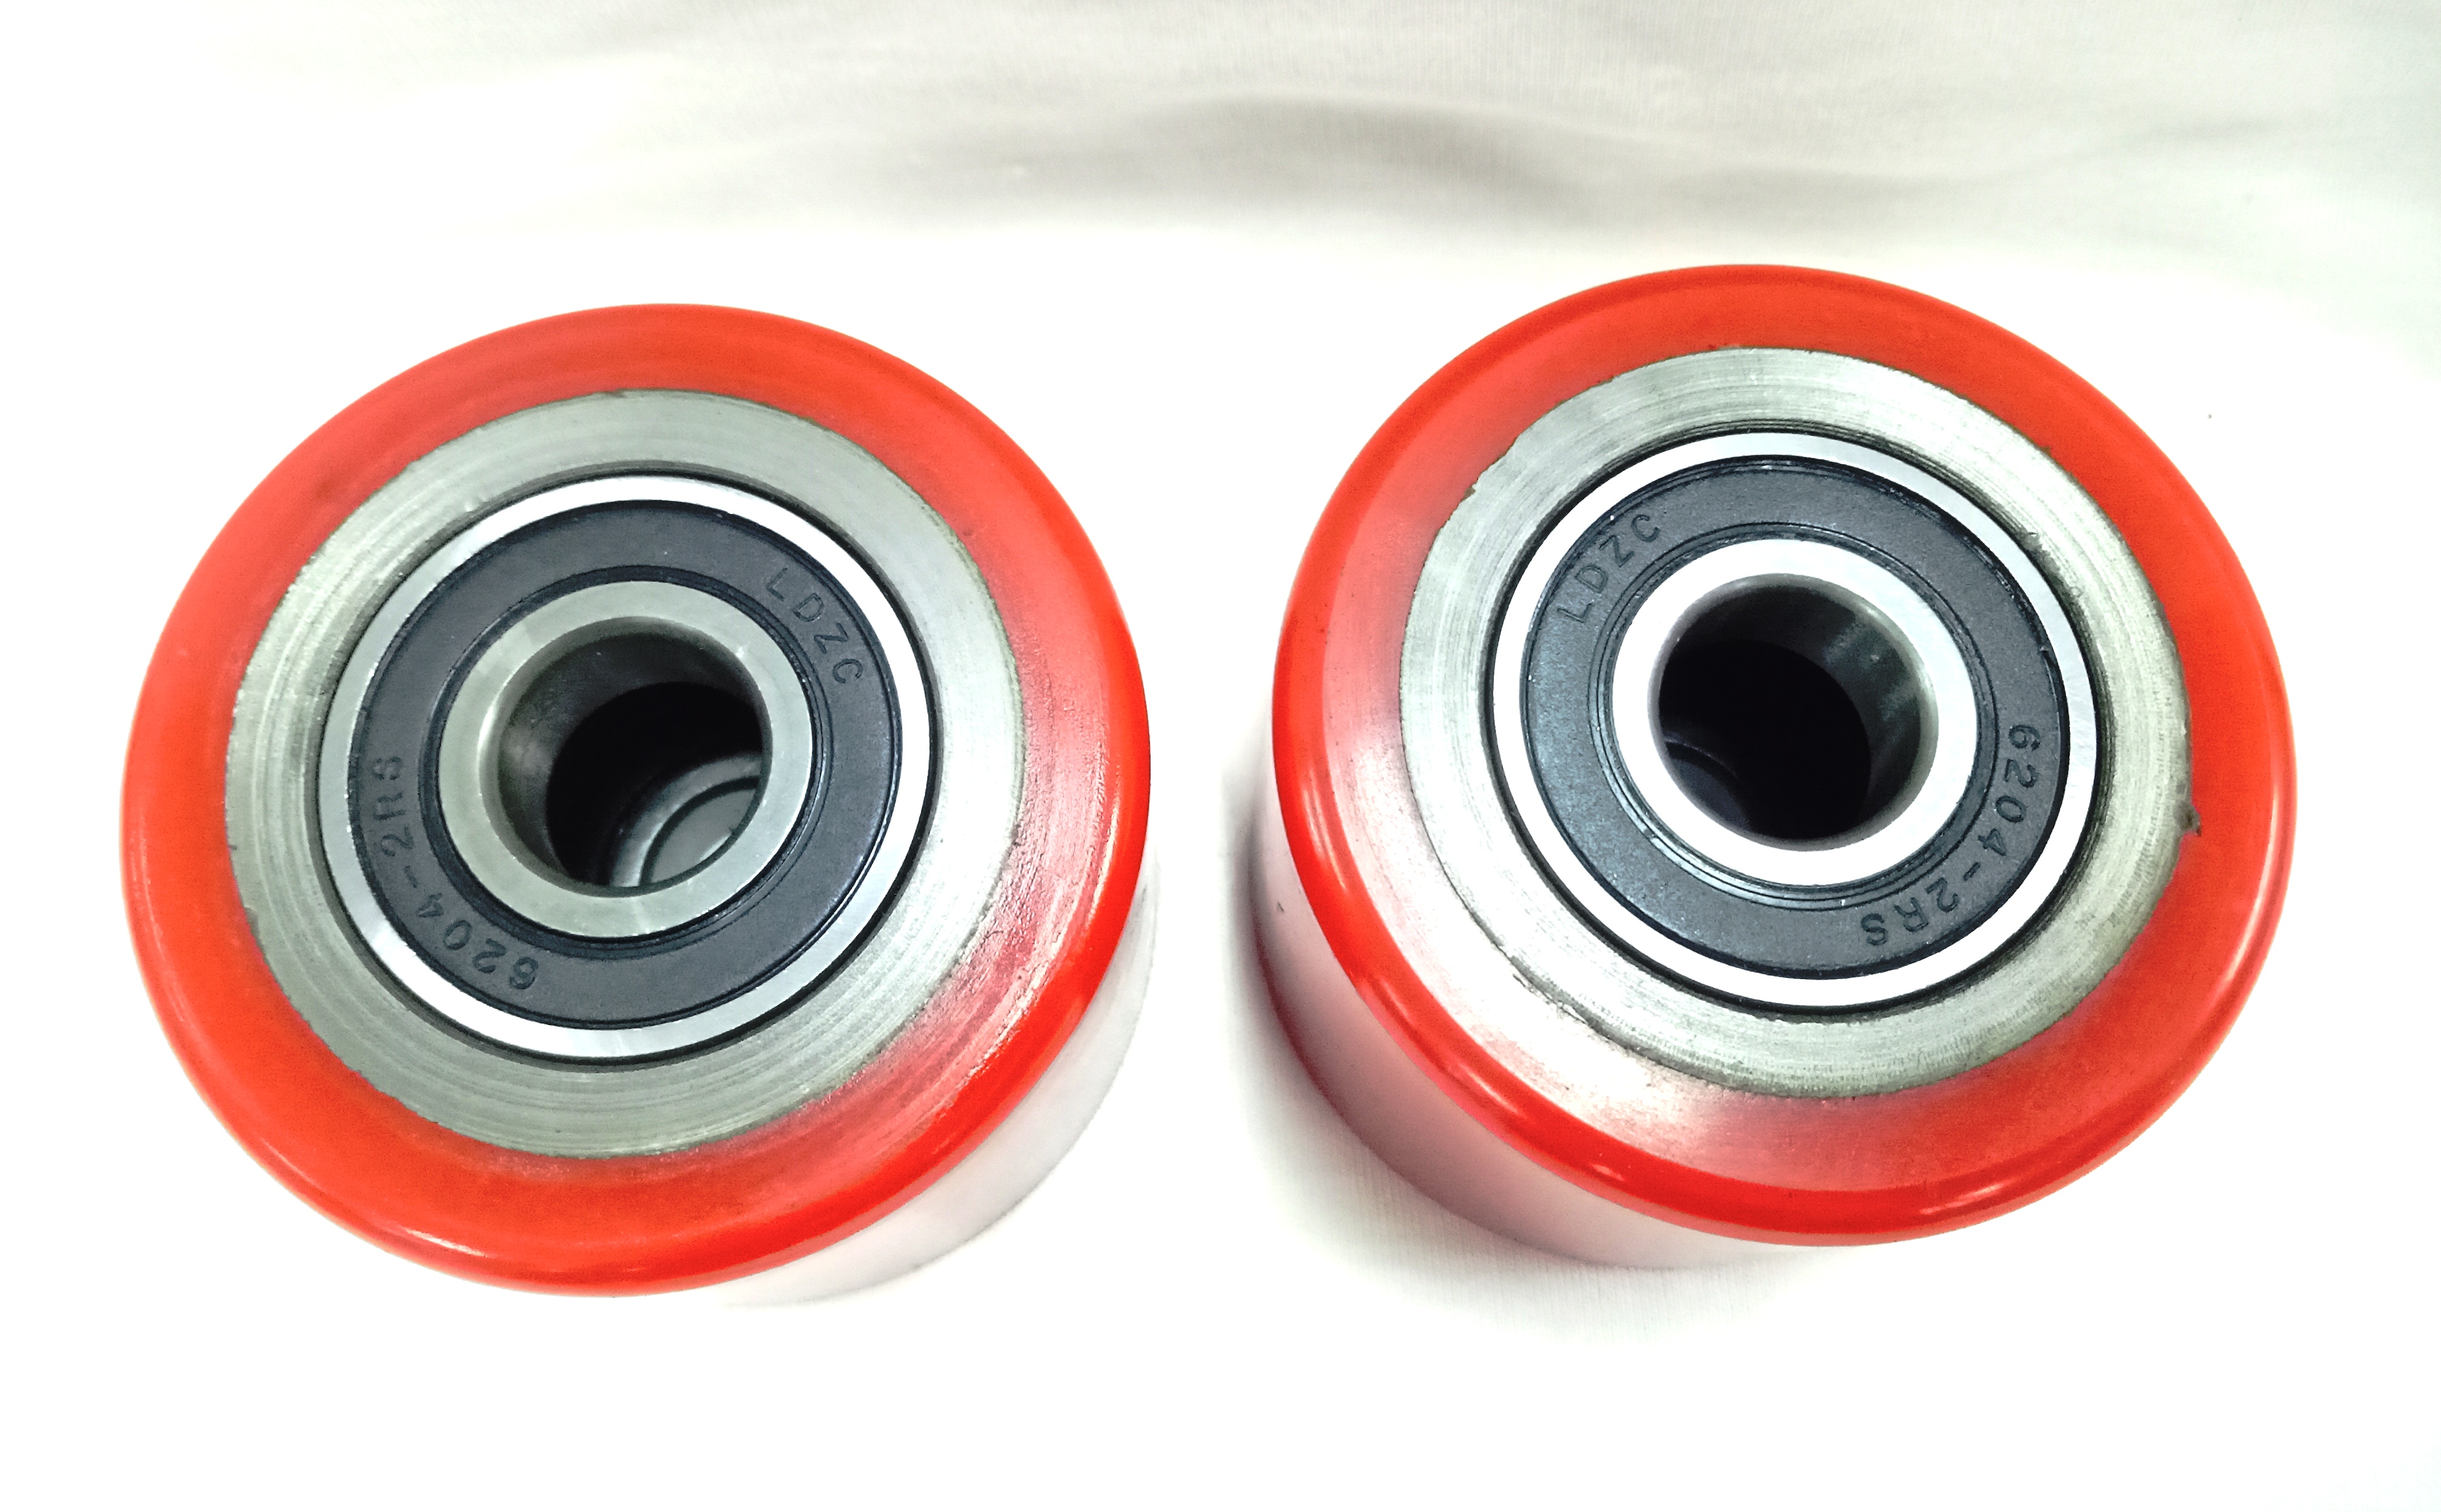 2PC Xilin 3 inch x 3.66 inch Pallet Jack Truck Polyurethane Load Wheel Sealed Precision Bearings ID 0.78 inch A Pair 